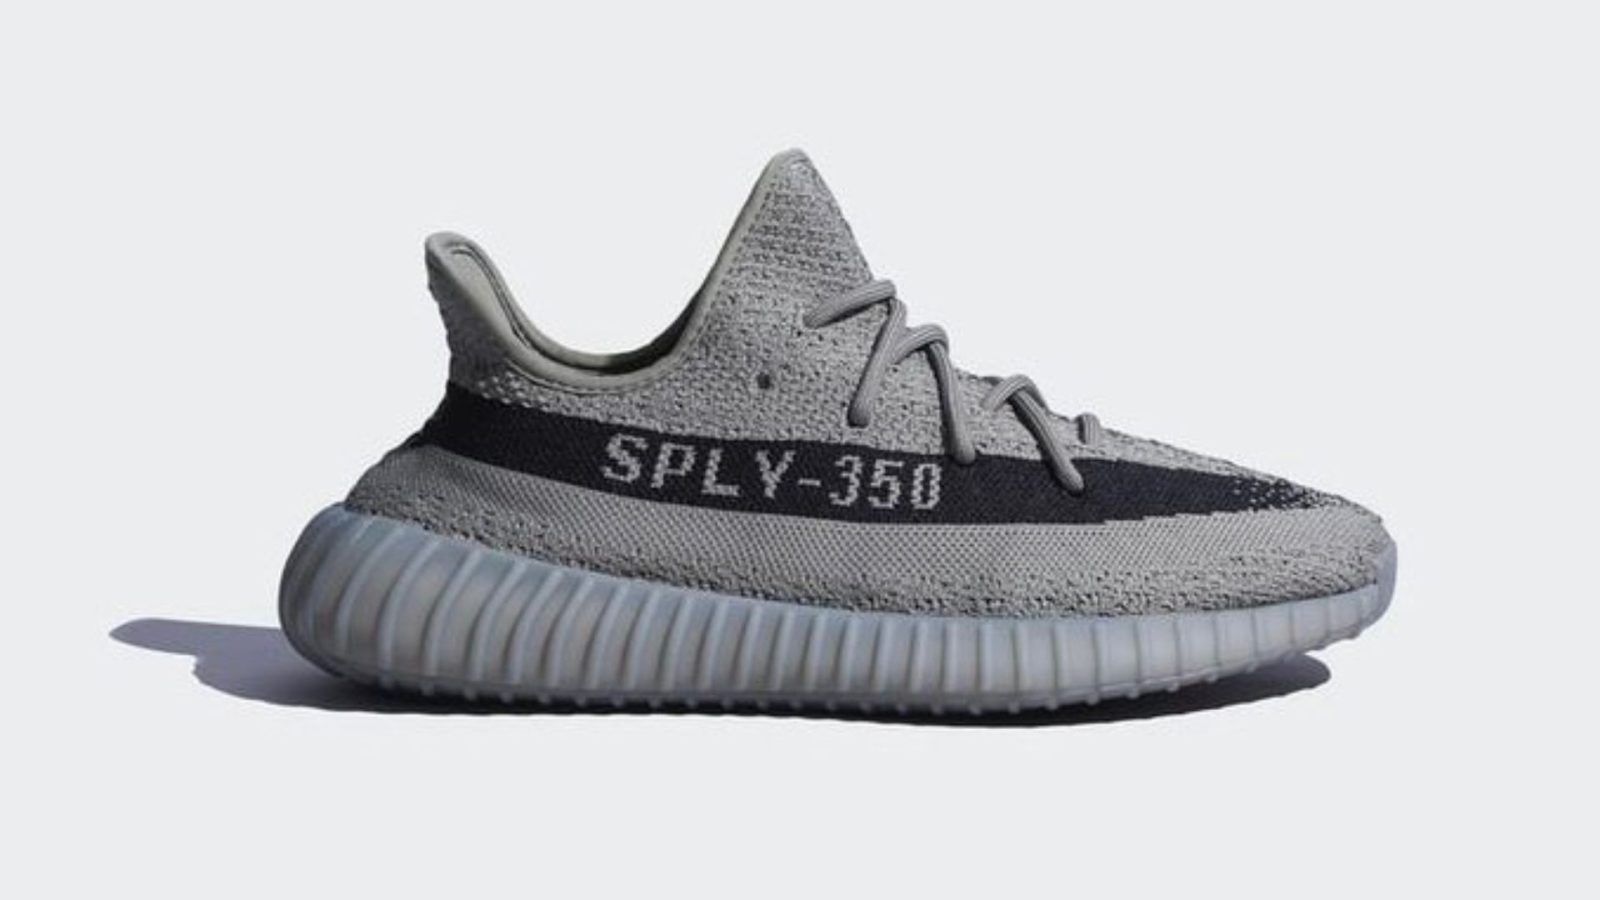 Adidas plans to release the unbranded 350 V2 in 2023